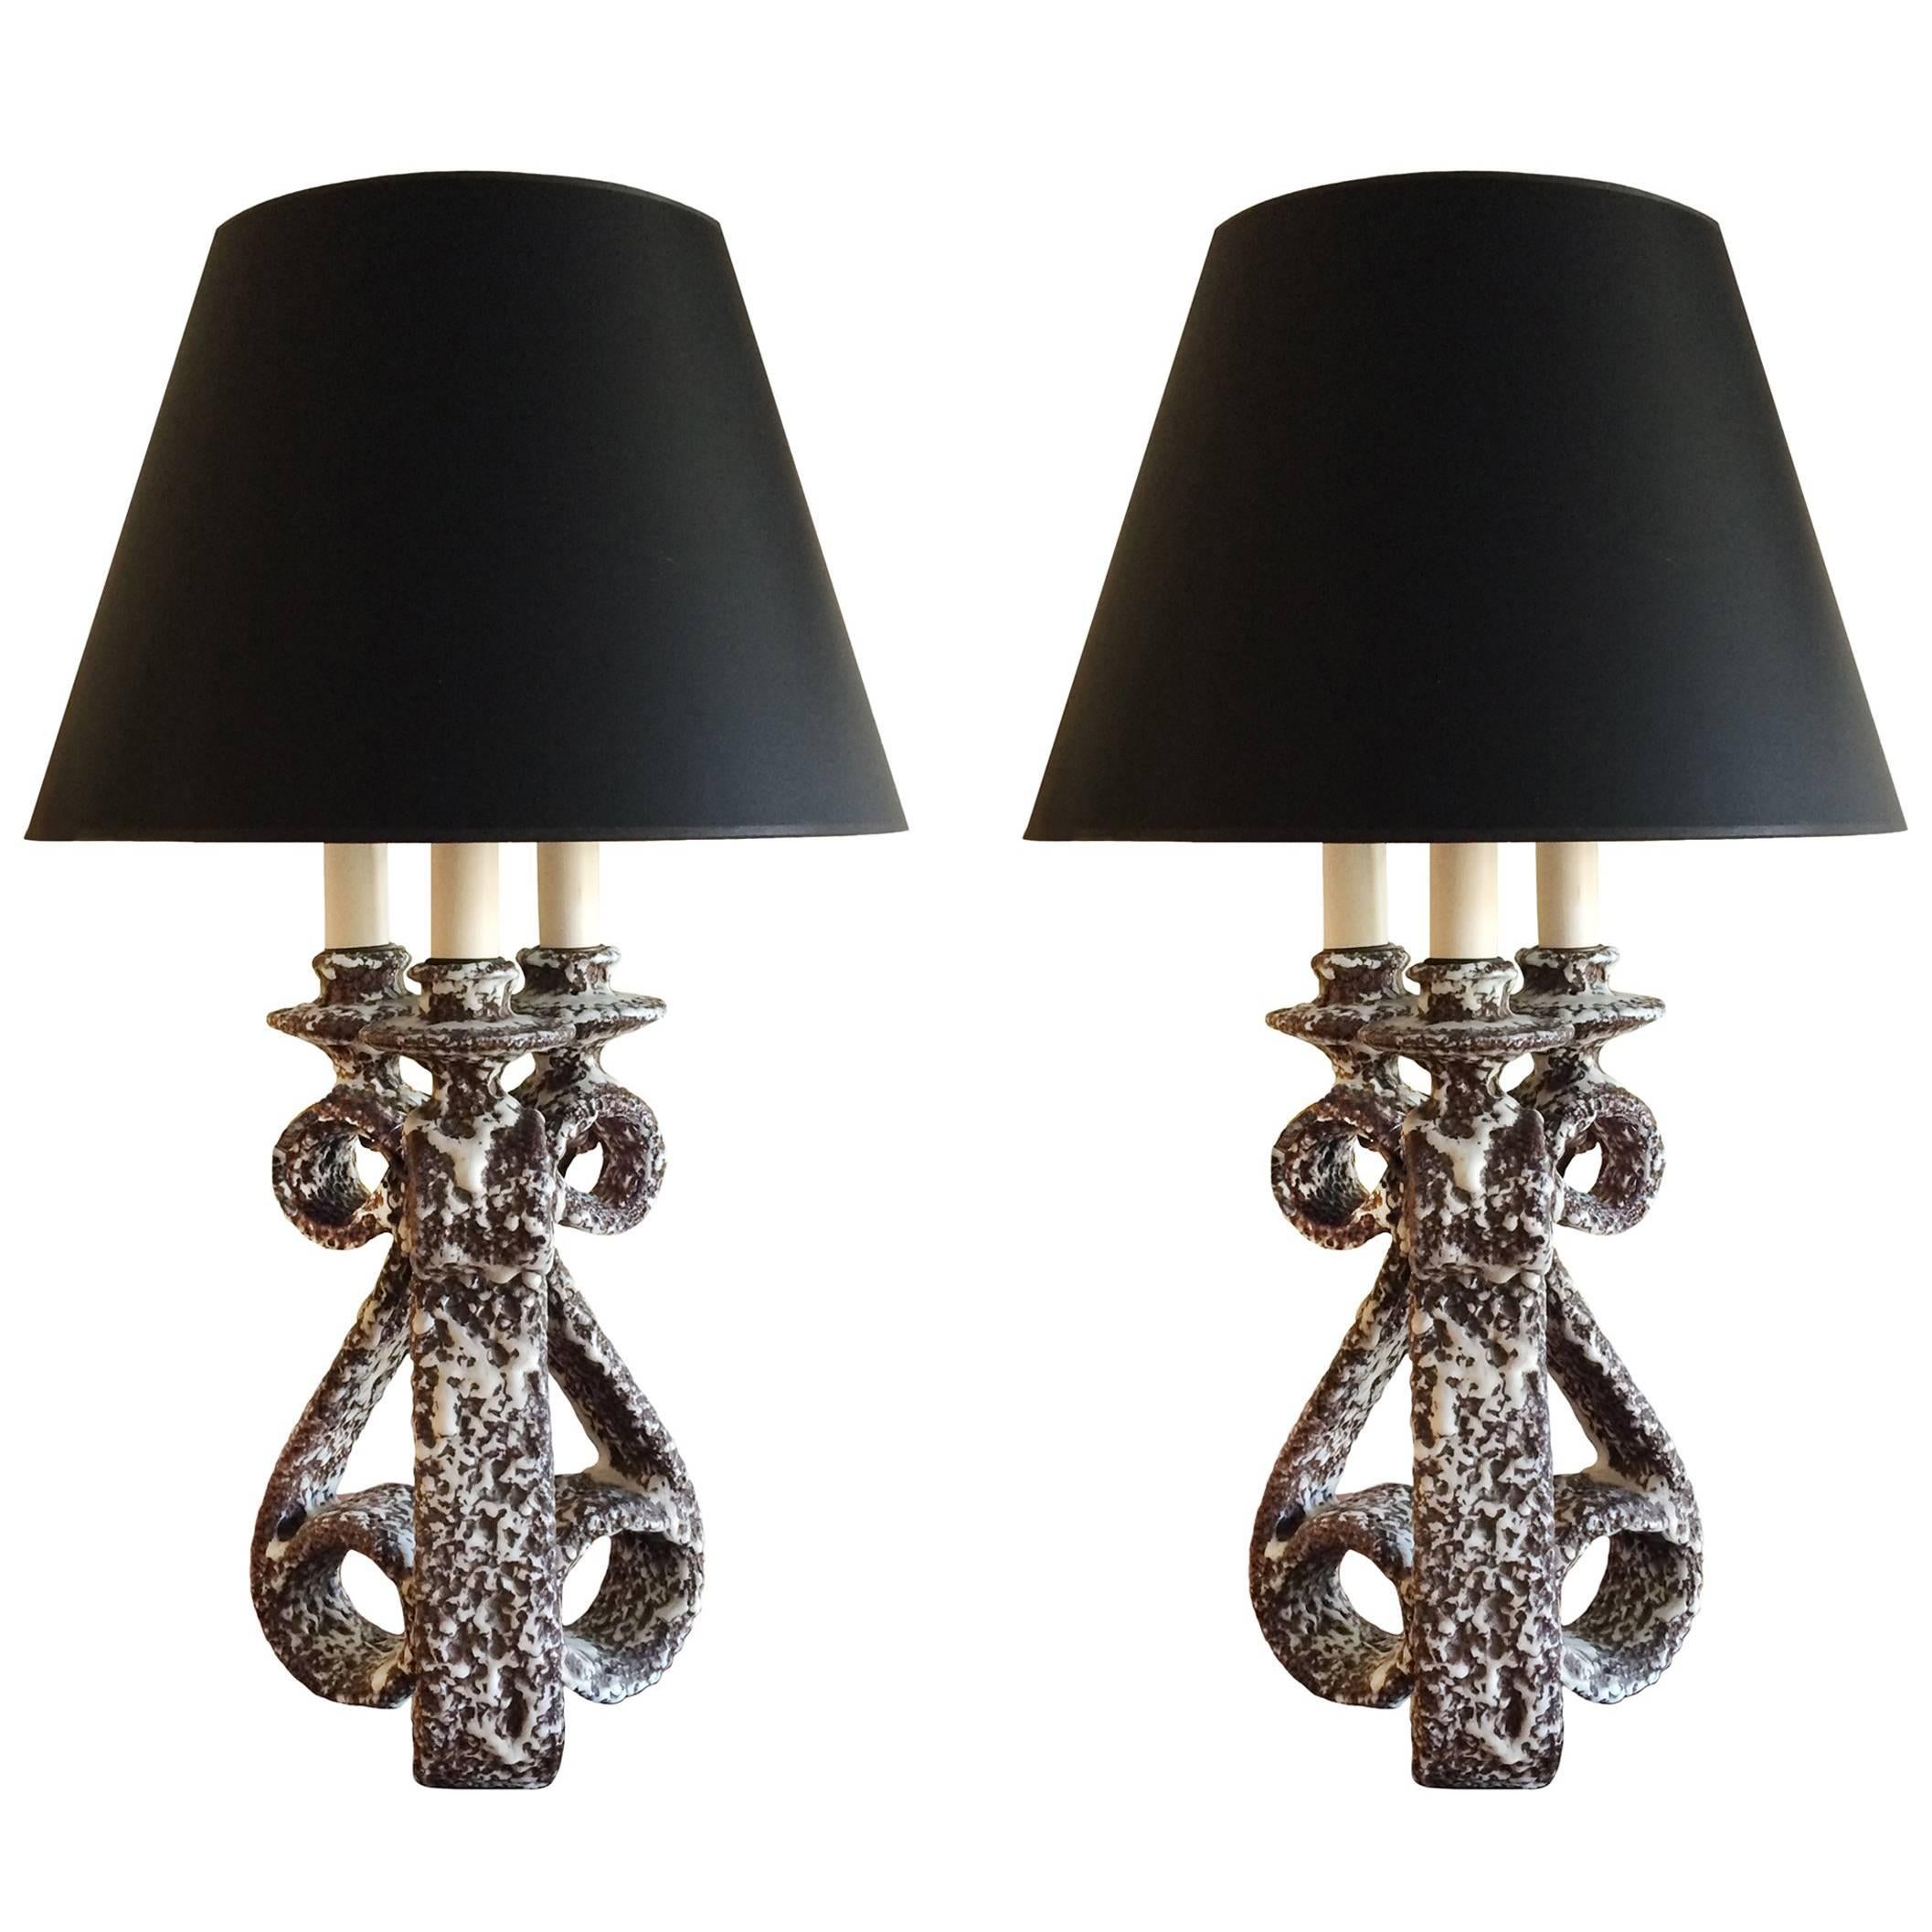 Pair of French Candelabra Lamps